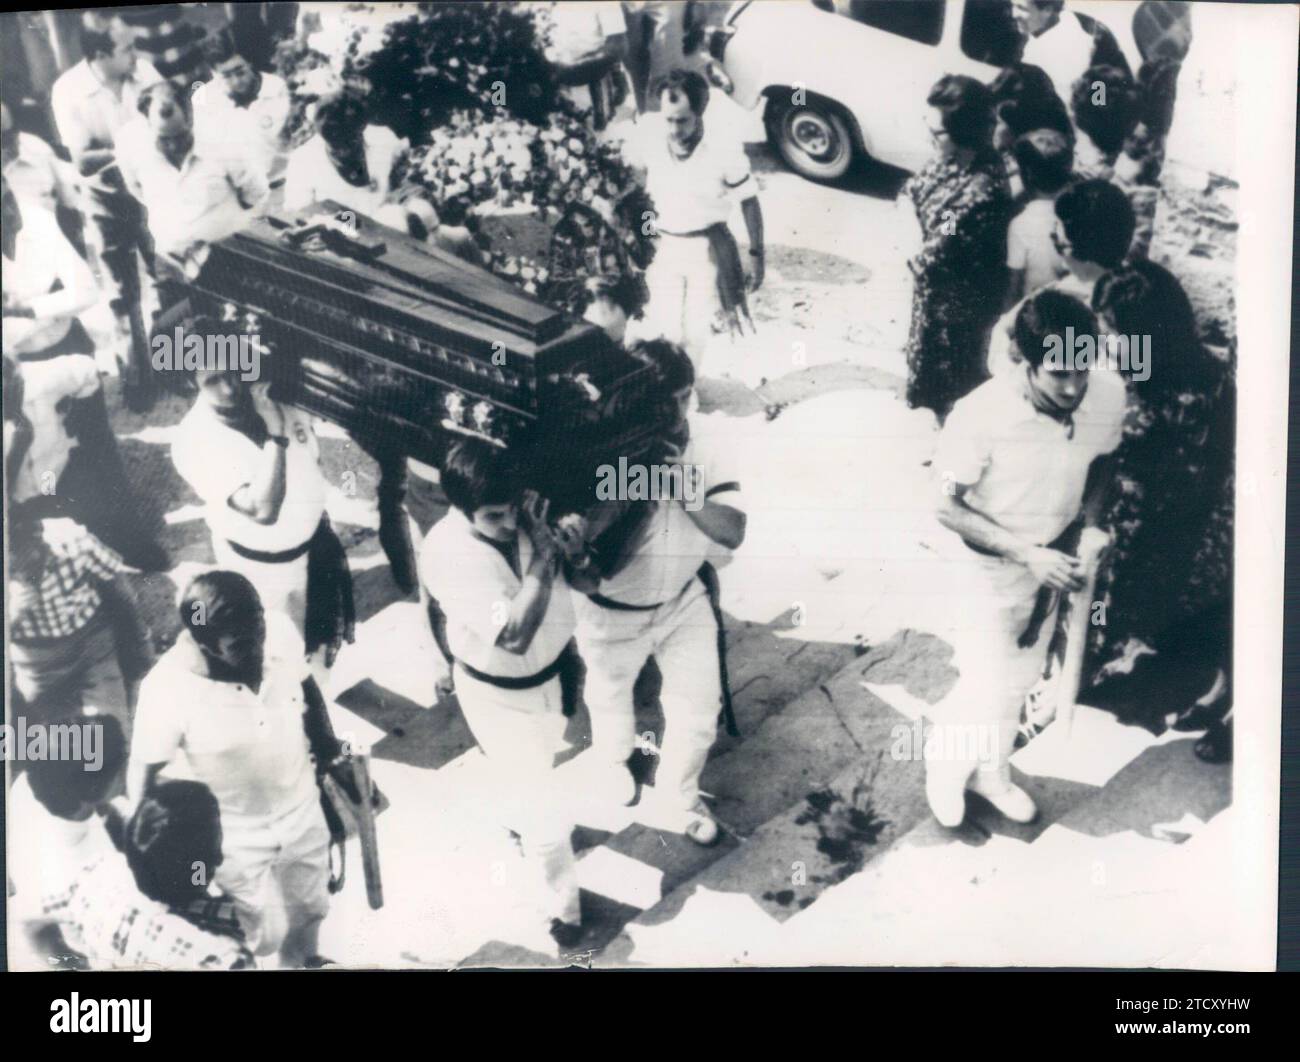 07/11/1975. Gregorio Gorriz Sarasa (41 years old, Arazuri, Navarra) dies after being caught by the bull 'Navarrico' from Francisco Javier Osborne's ranch in the alley at the entrance to the Bullring. In the image, the funeral of the young man in his hometown, Arazuri. Credit: Album / Archivo ABC Stock Photo